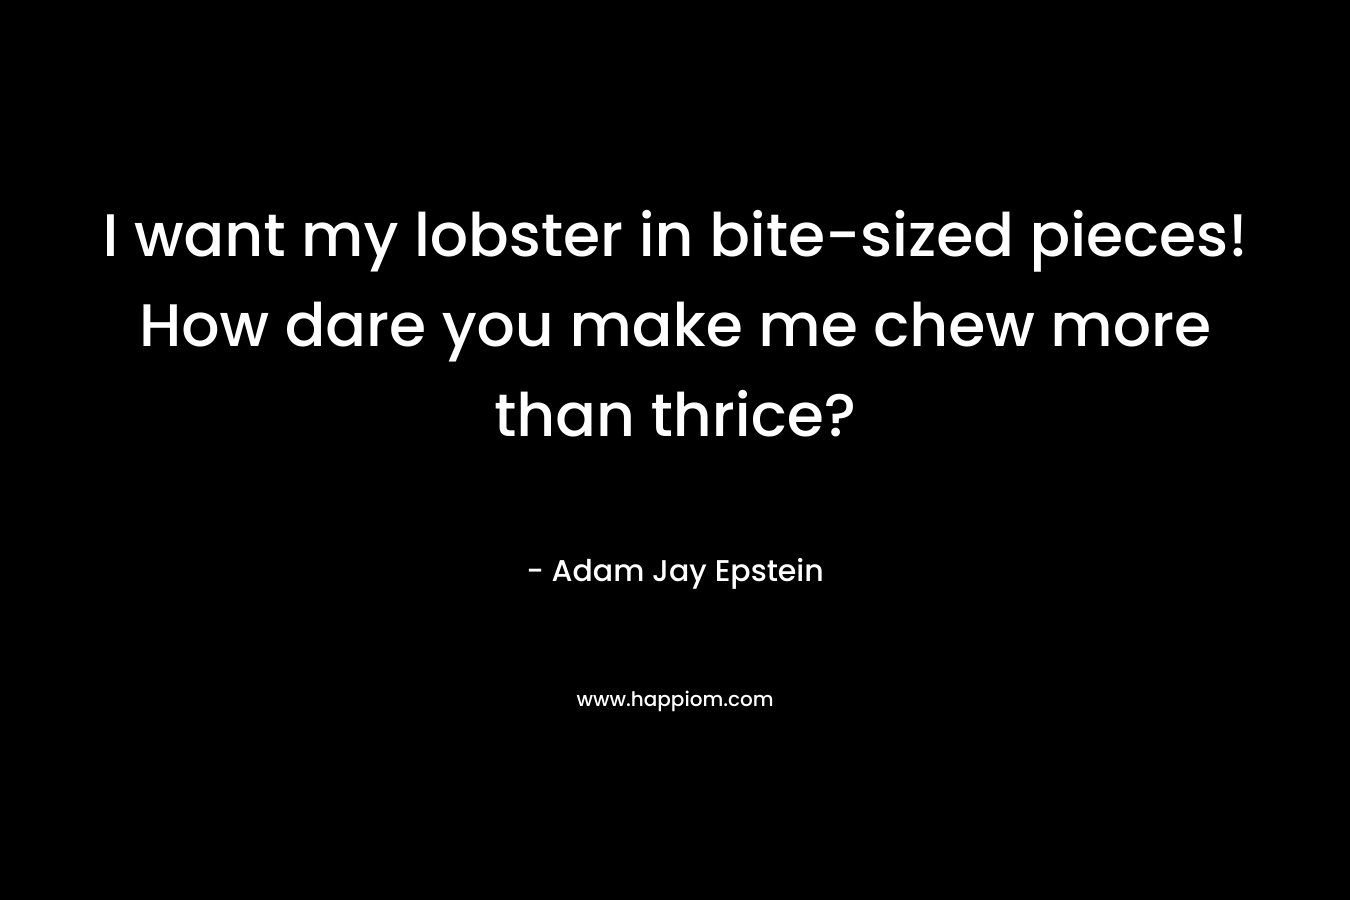 I want my lobster in bite-sized pieces! How dare you make me chew more than thrice?